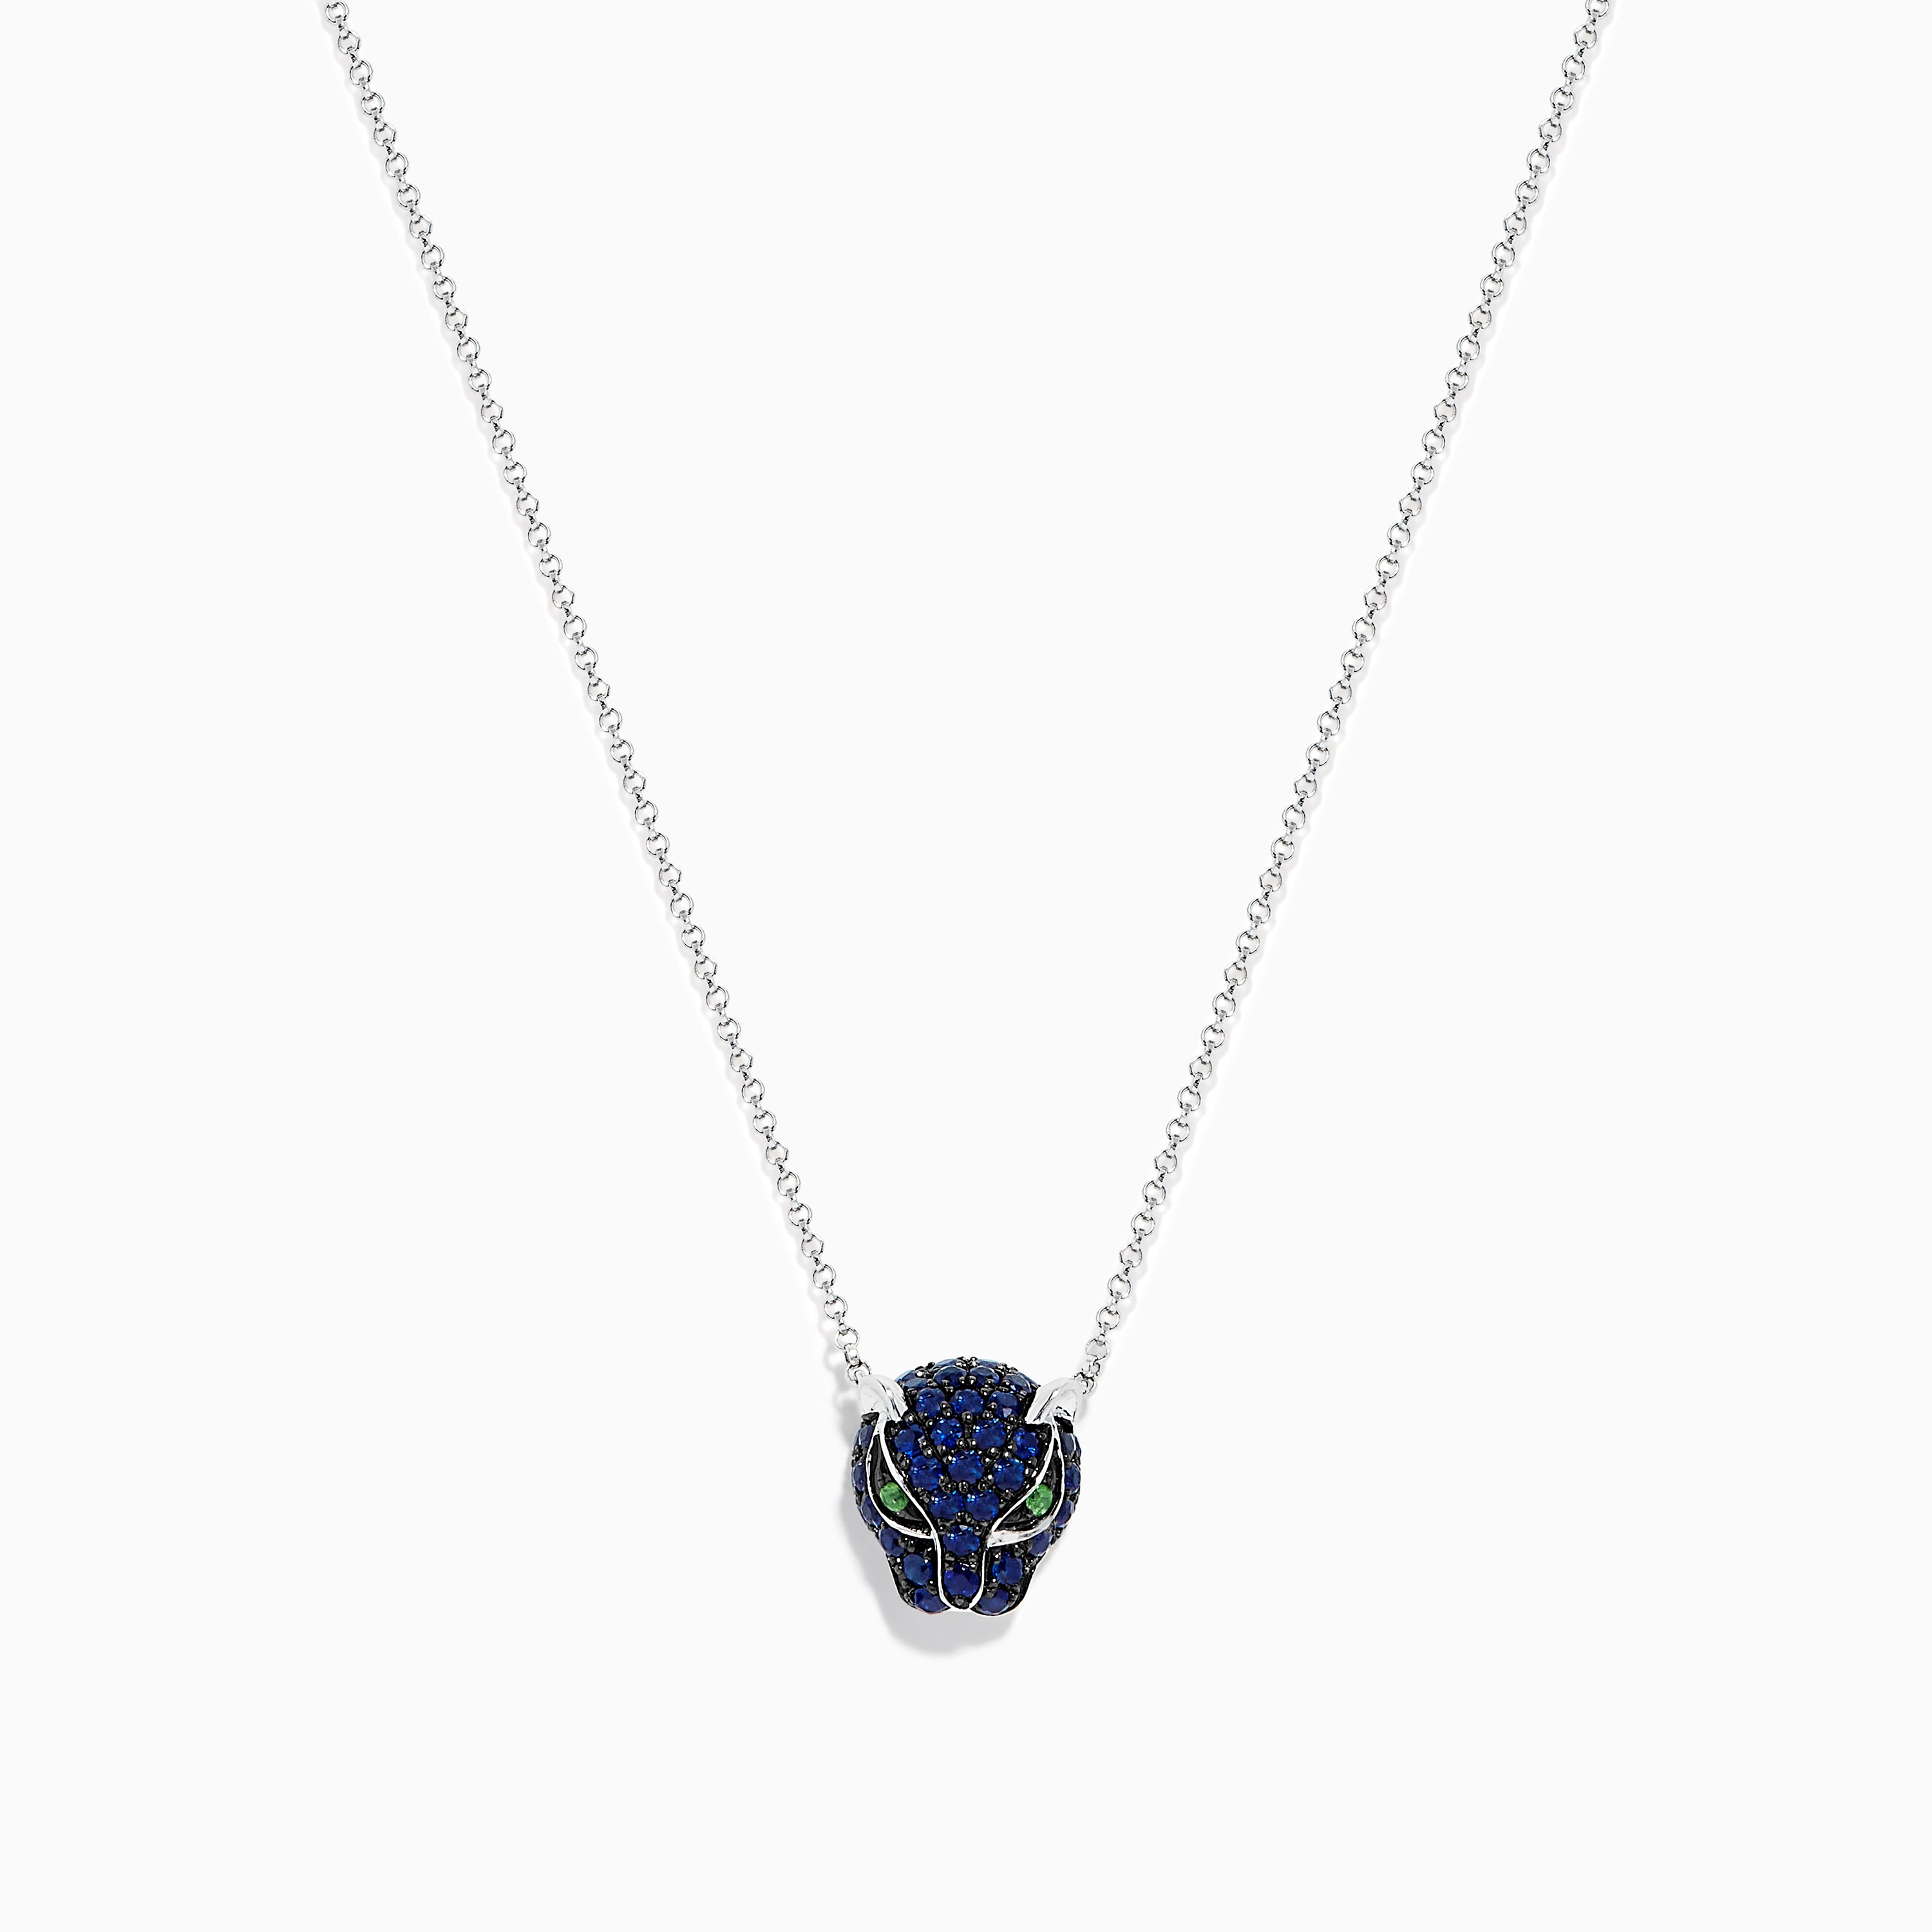 Effy Signature 14K White Gold Blue Sapphire and Tsavorite Panther Necklace